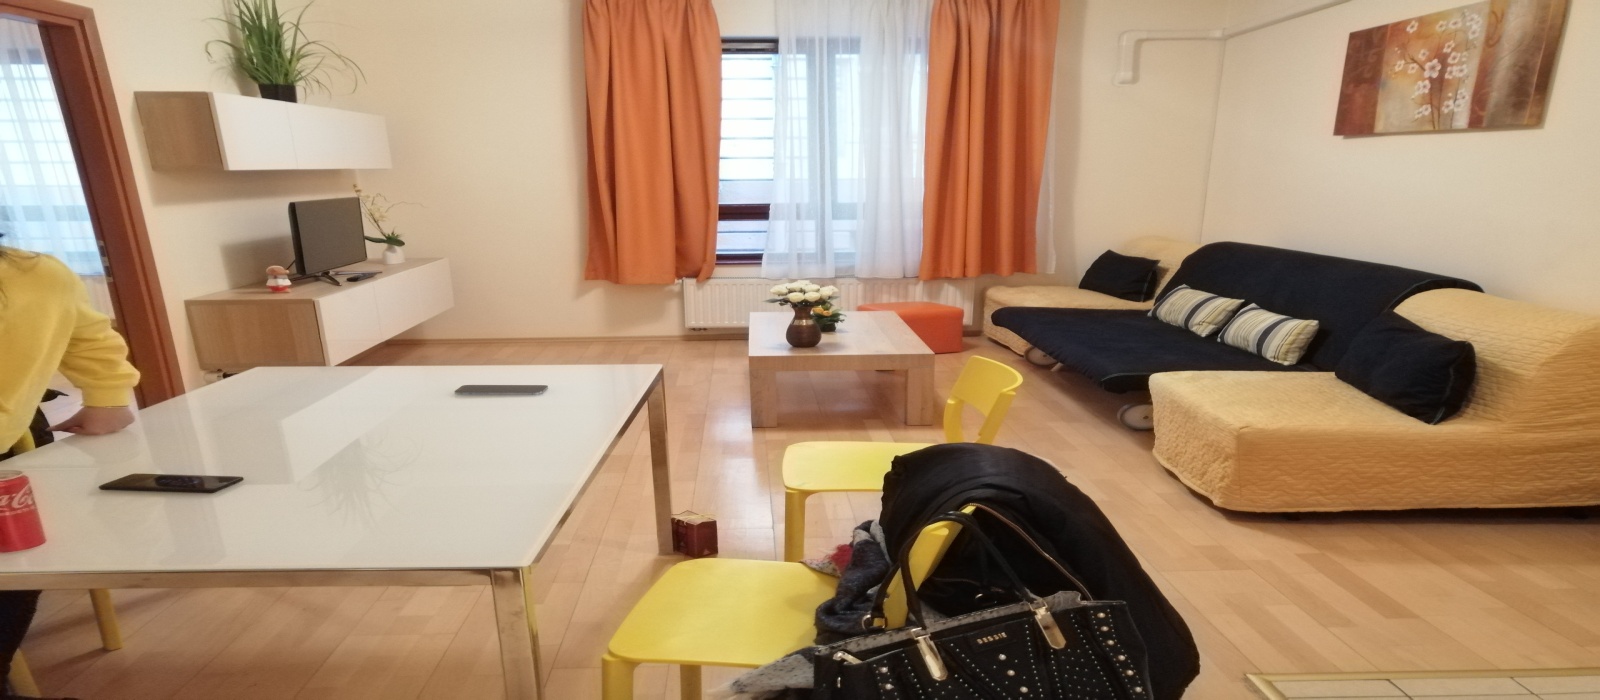 Hungary, 1 Bedroom Bedrooms, 1 Room Rooms,1 BathroomBathrooms,Apartment,For sale,1360